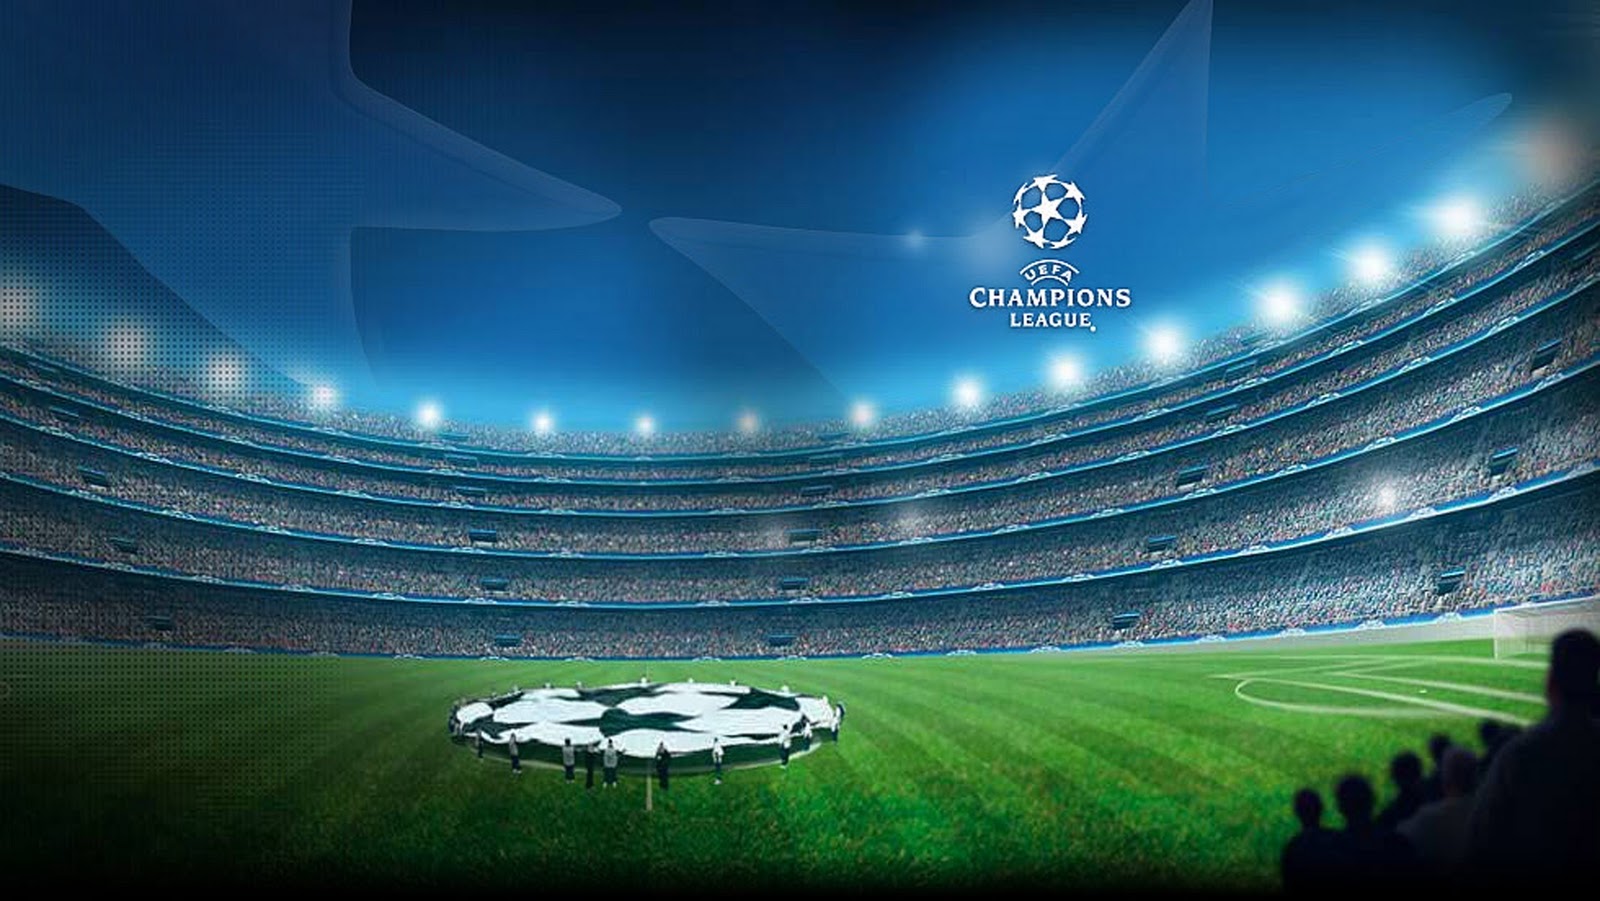 UEFA Champions League 2013 HD Wallpapers   Wallpapers